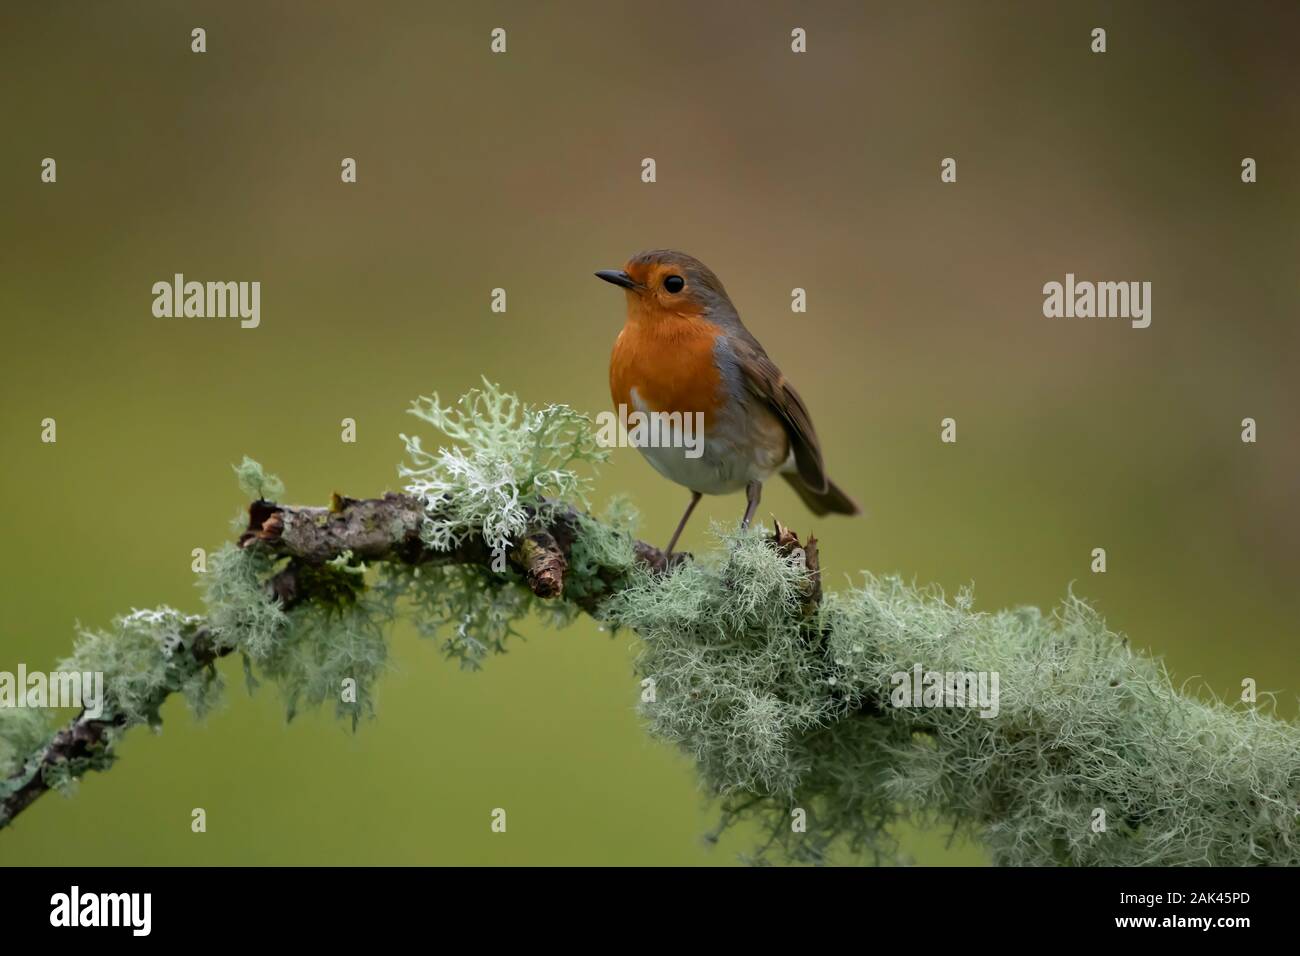 Robin (Erinaceus rubecula). Perched on tree lichen covered branch. Stock Photo